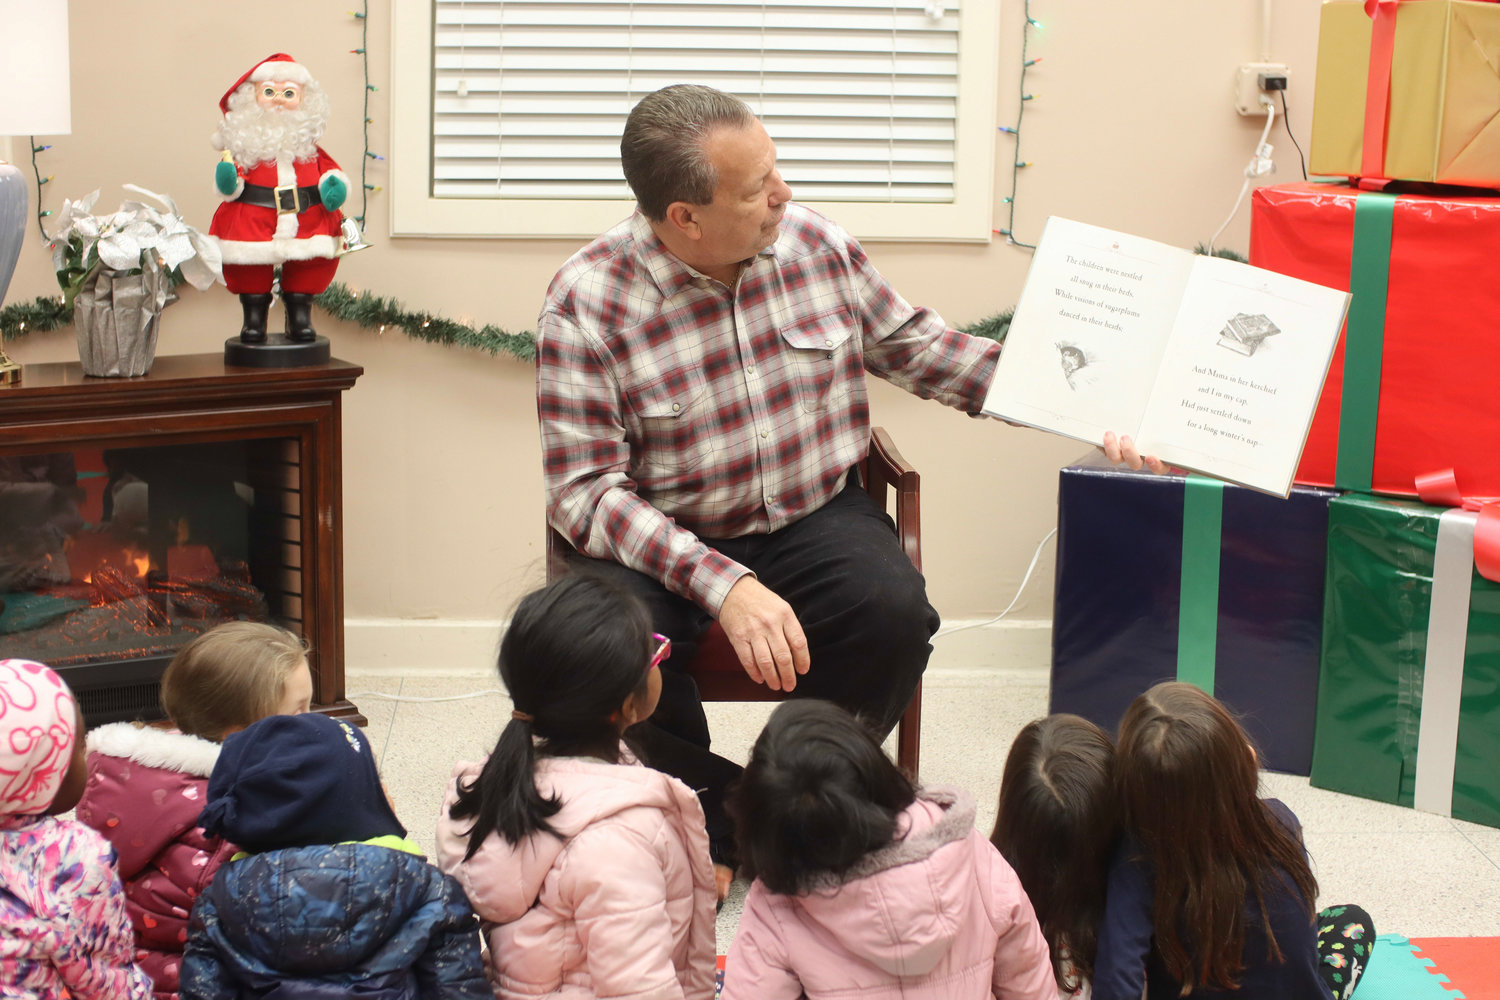 Inside the Community Center, Mayor Edwin Fare did story time with the kids.